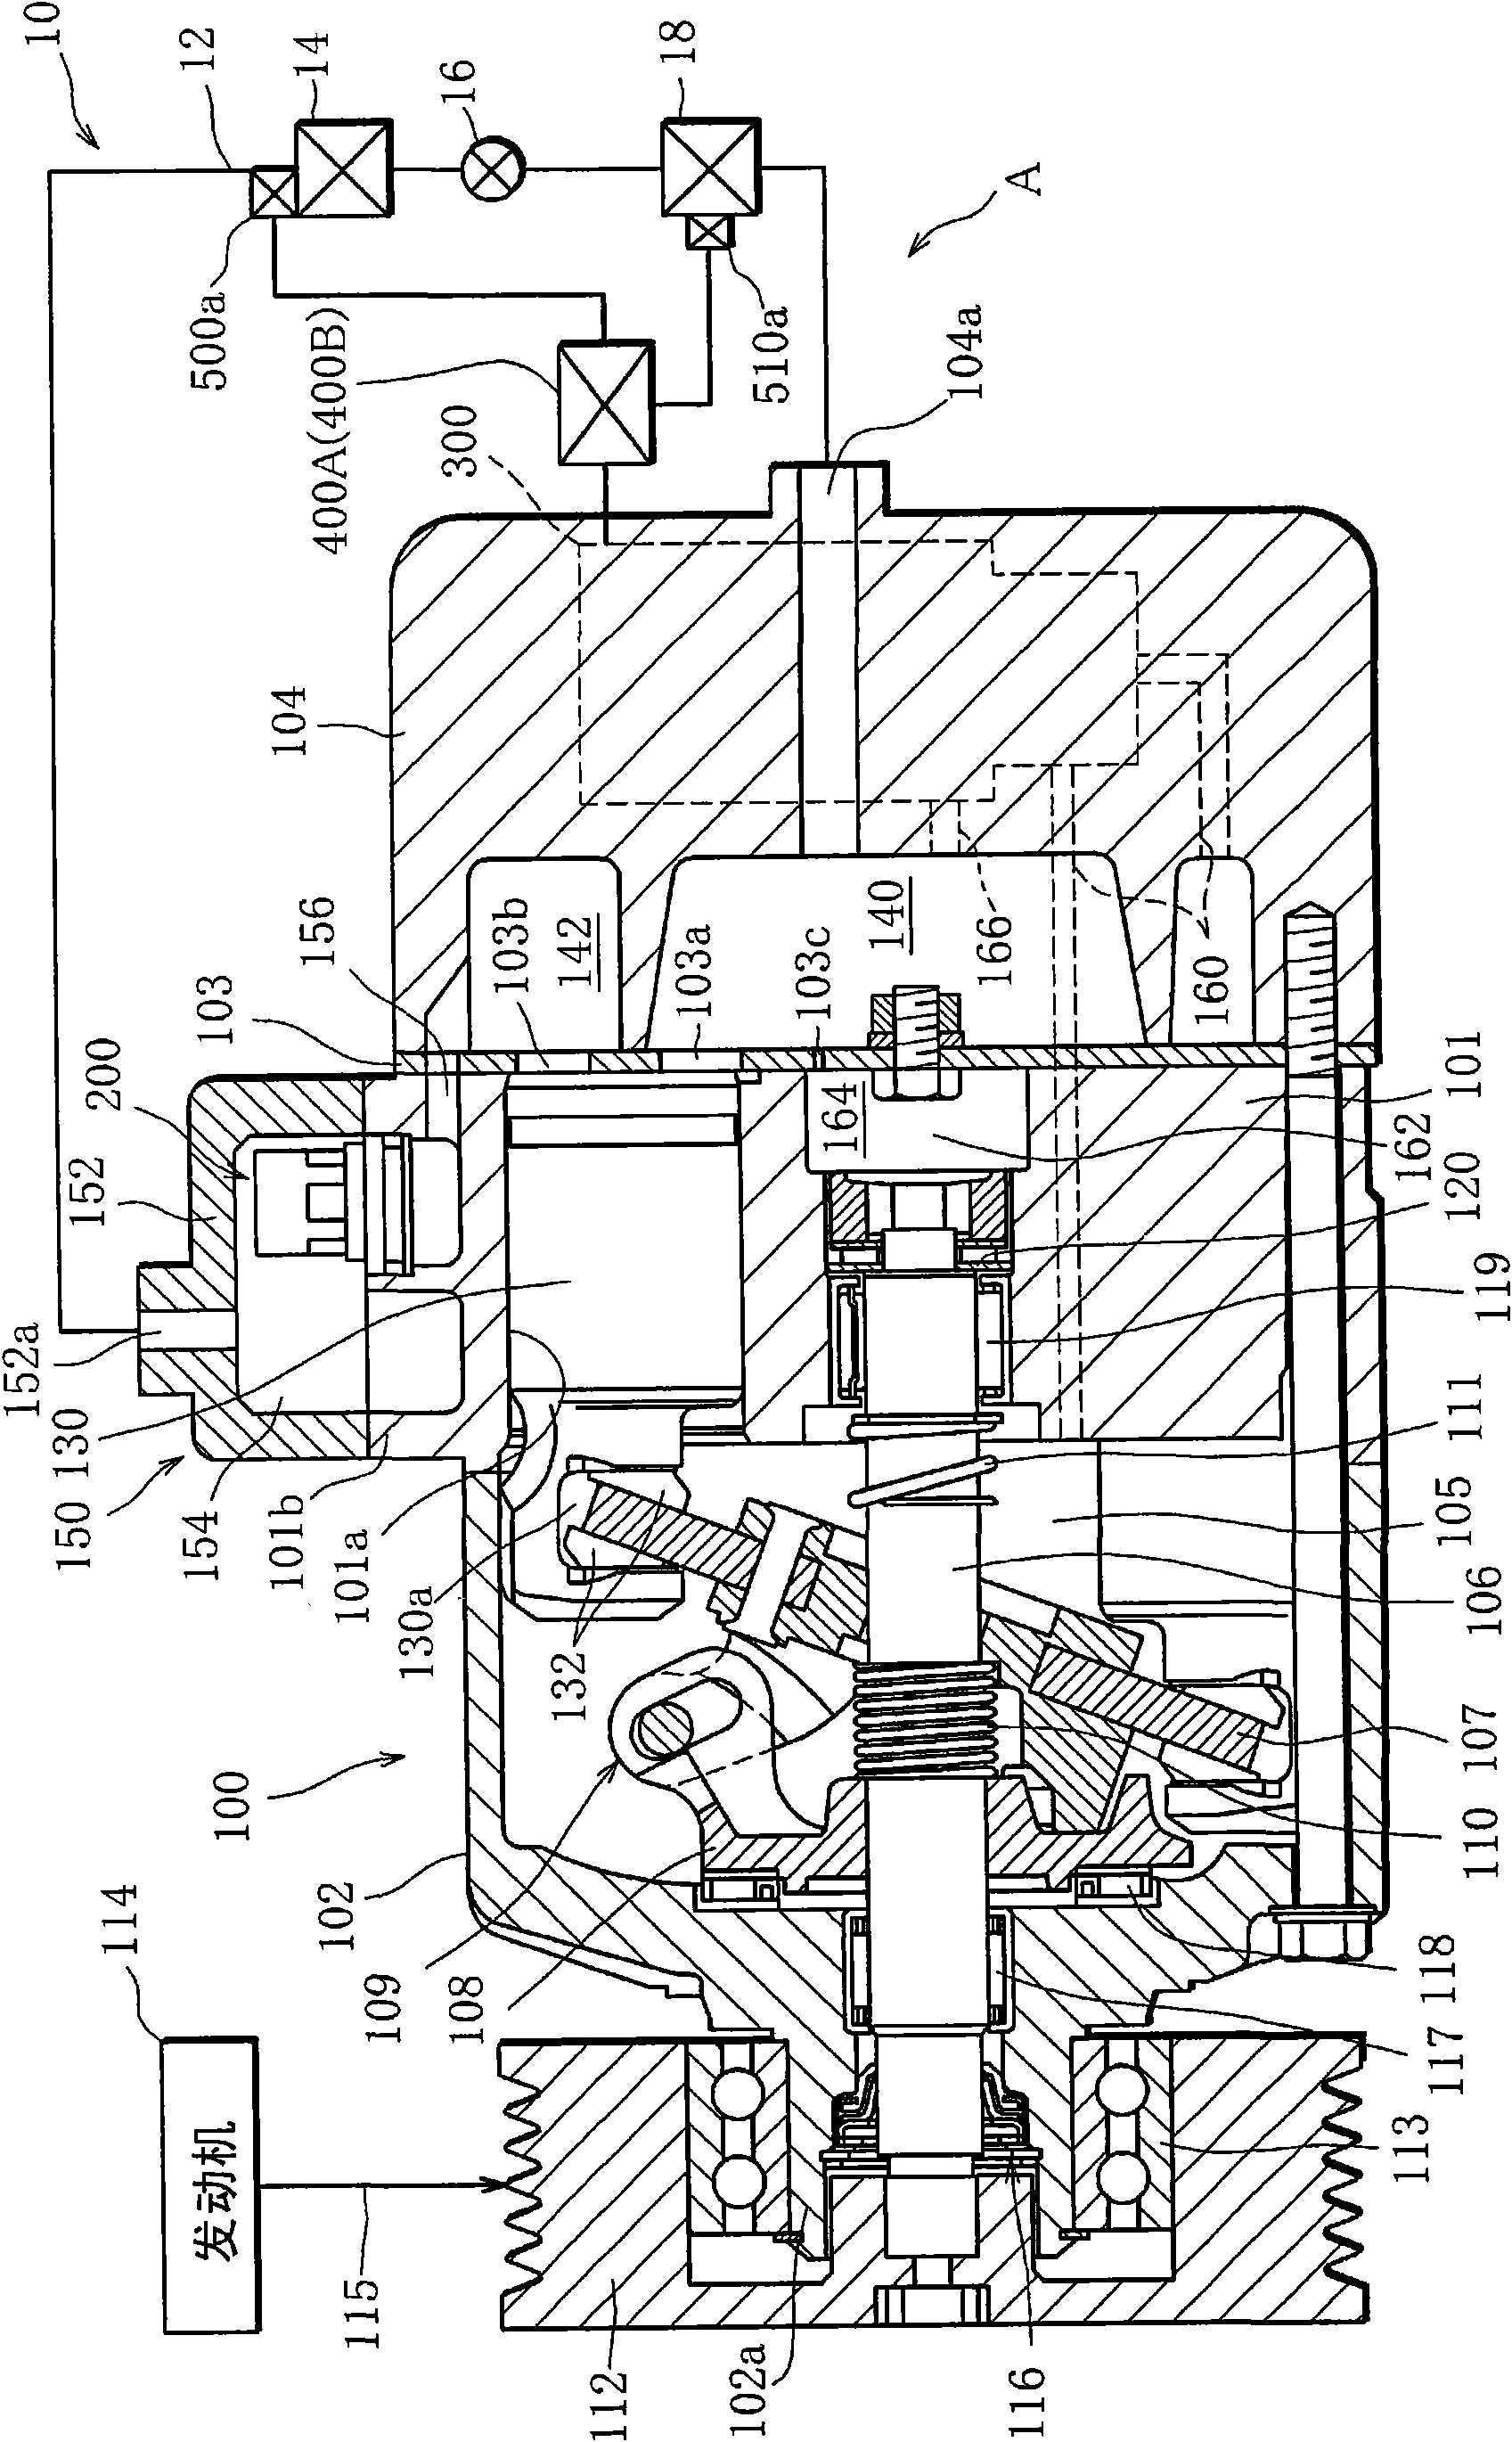 Displacement control system for variable displacement compressor